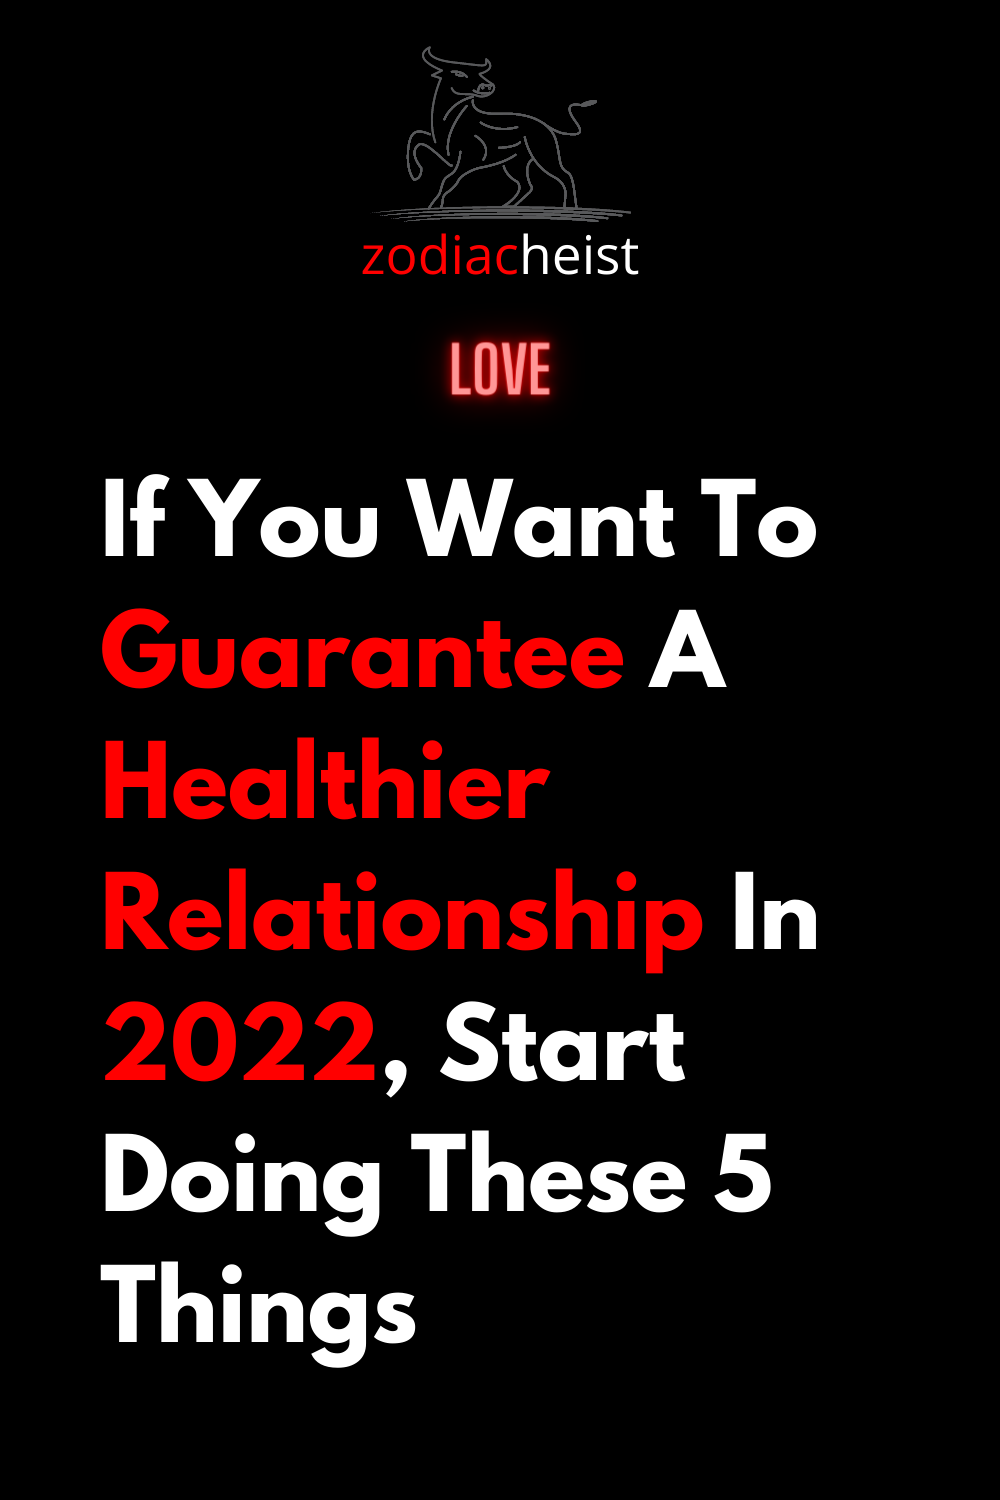 If You Want To Guarantee A Healthier Relationship In 2022, Start Doing These 5 Things